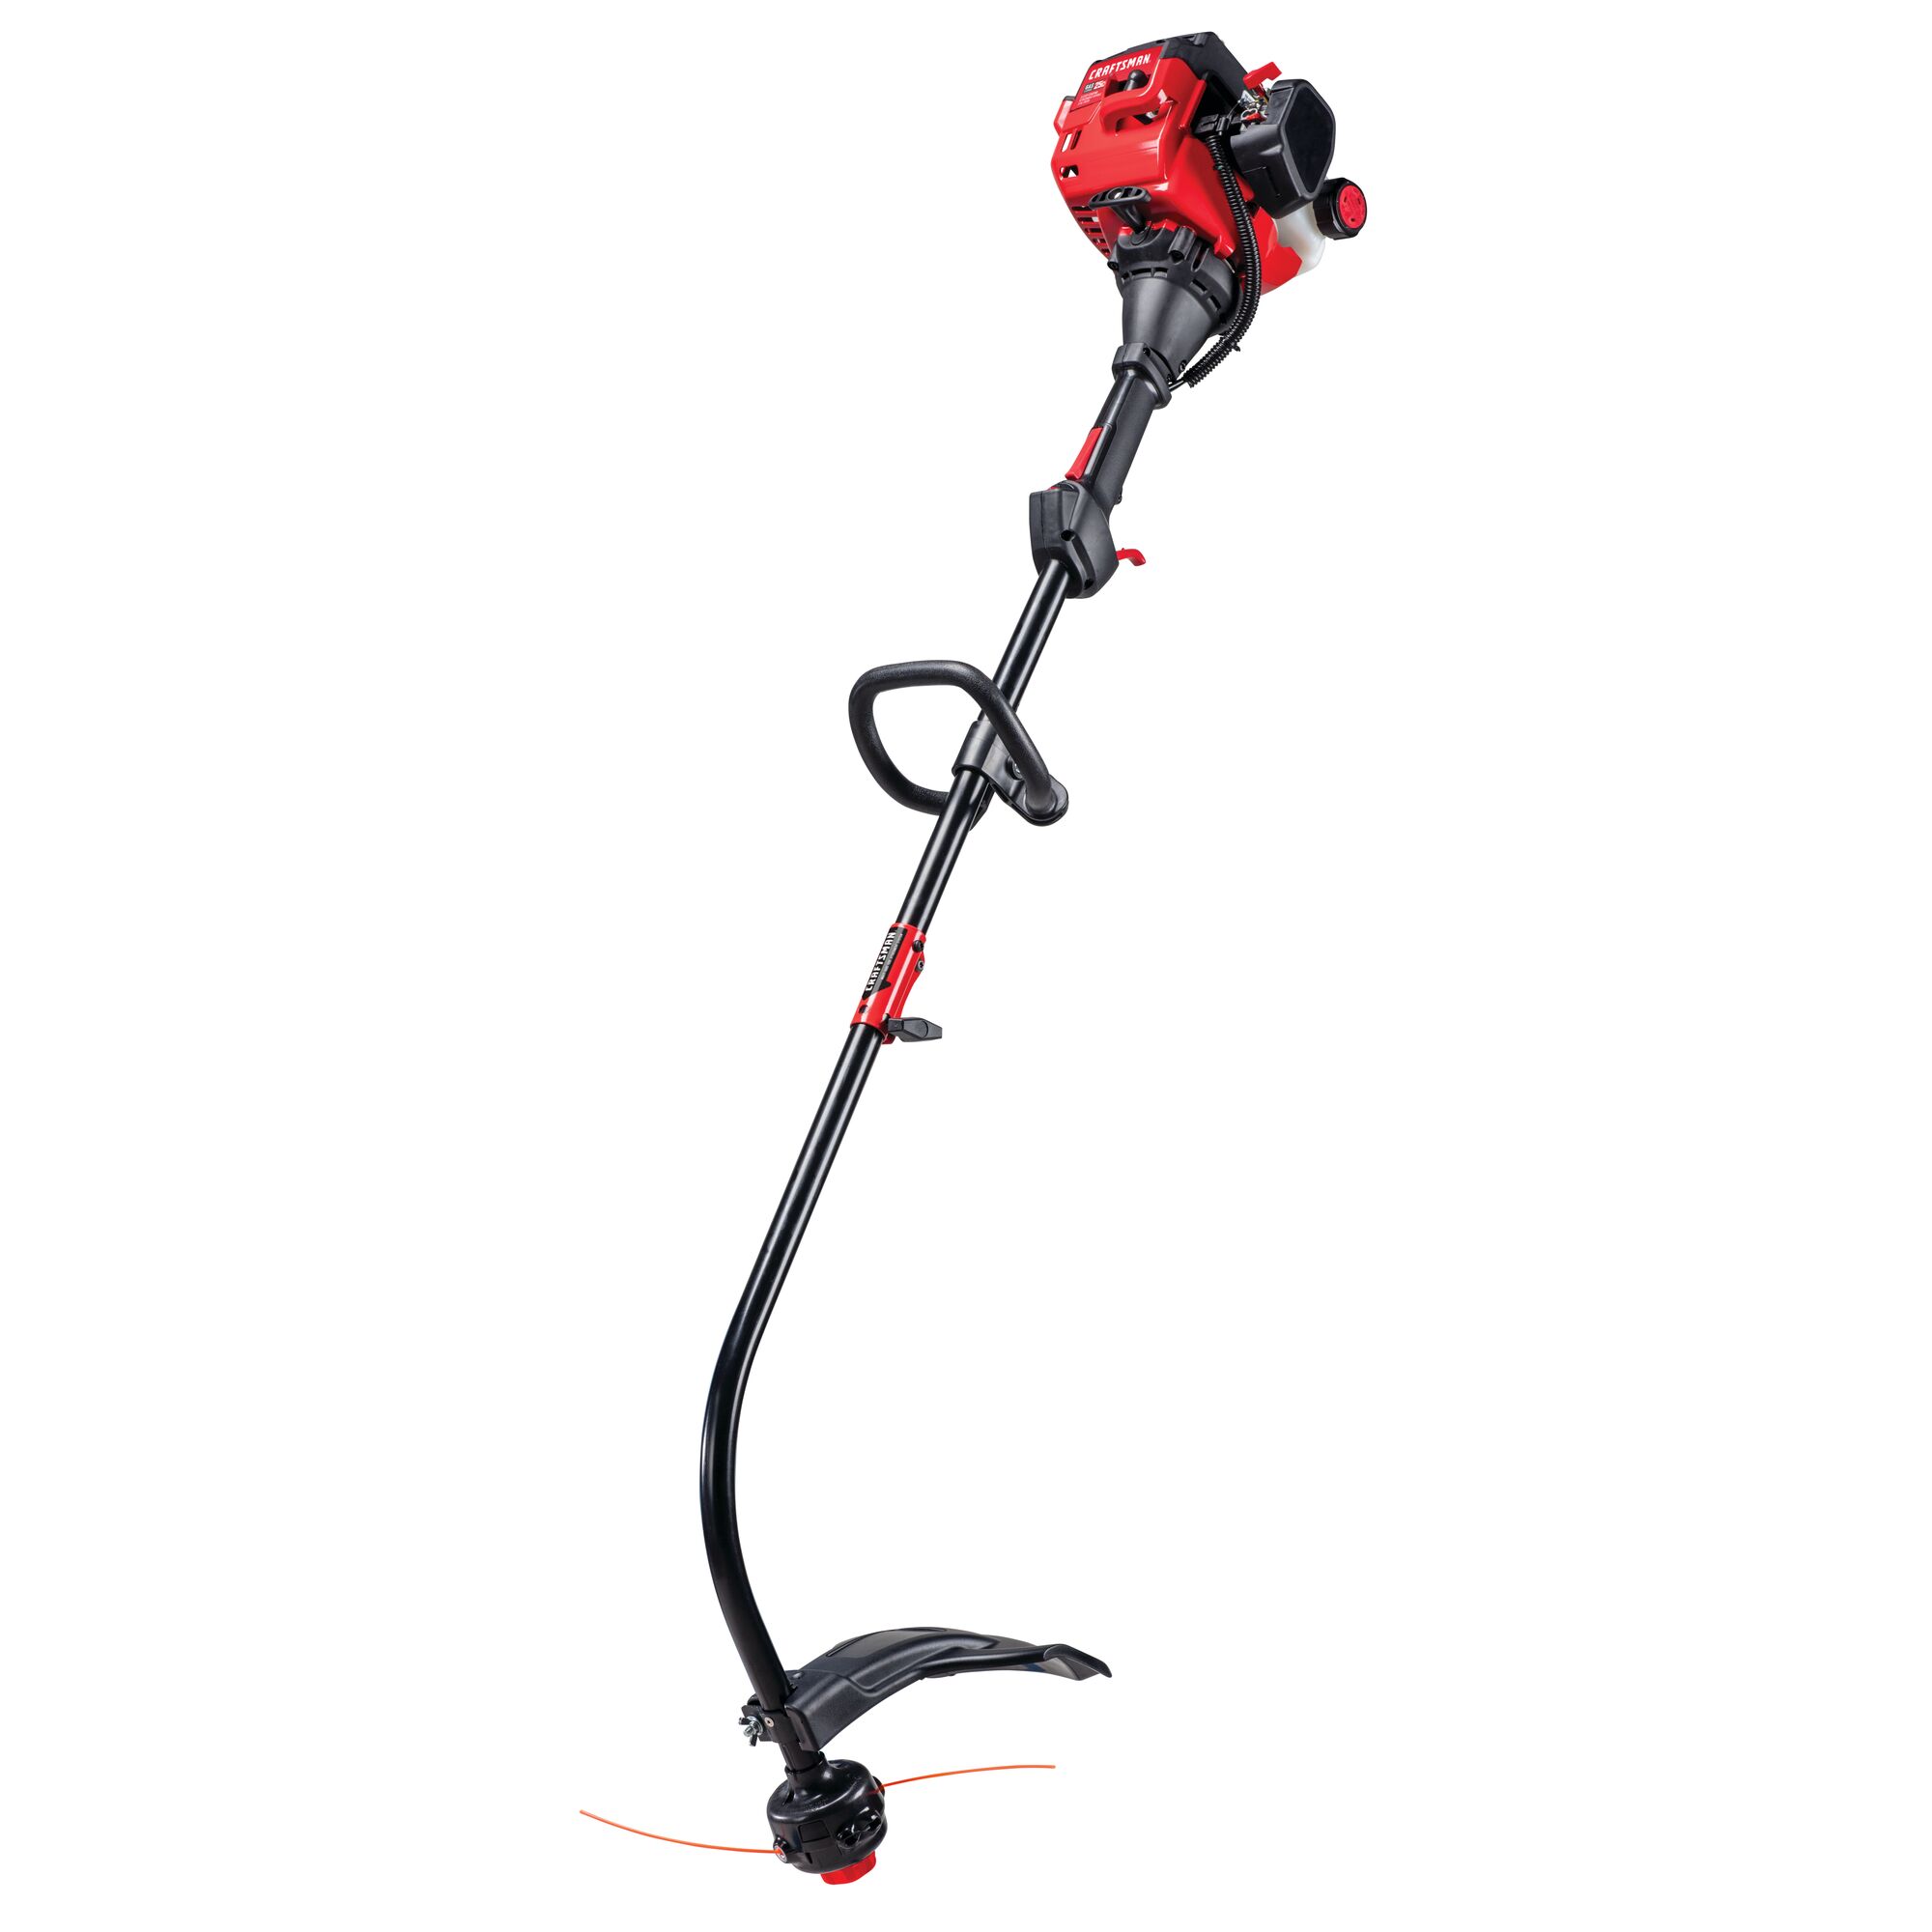 2 Cycle 17 inch curved shaft gas weedwacker trimmer.